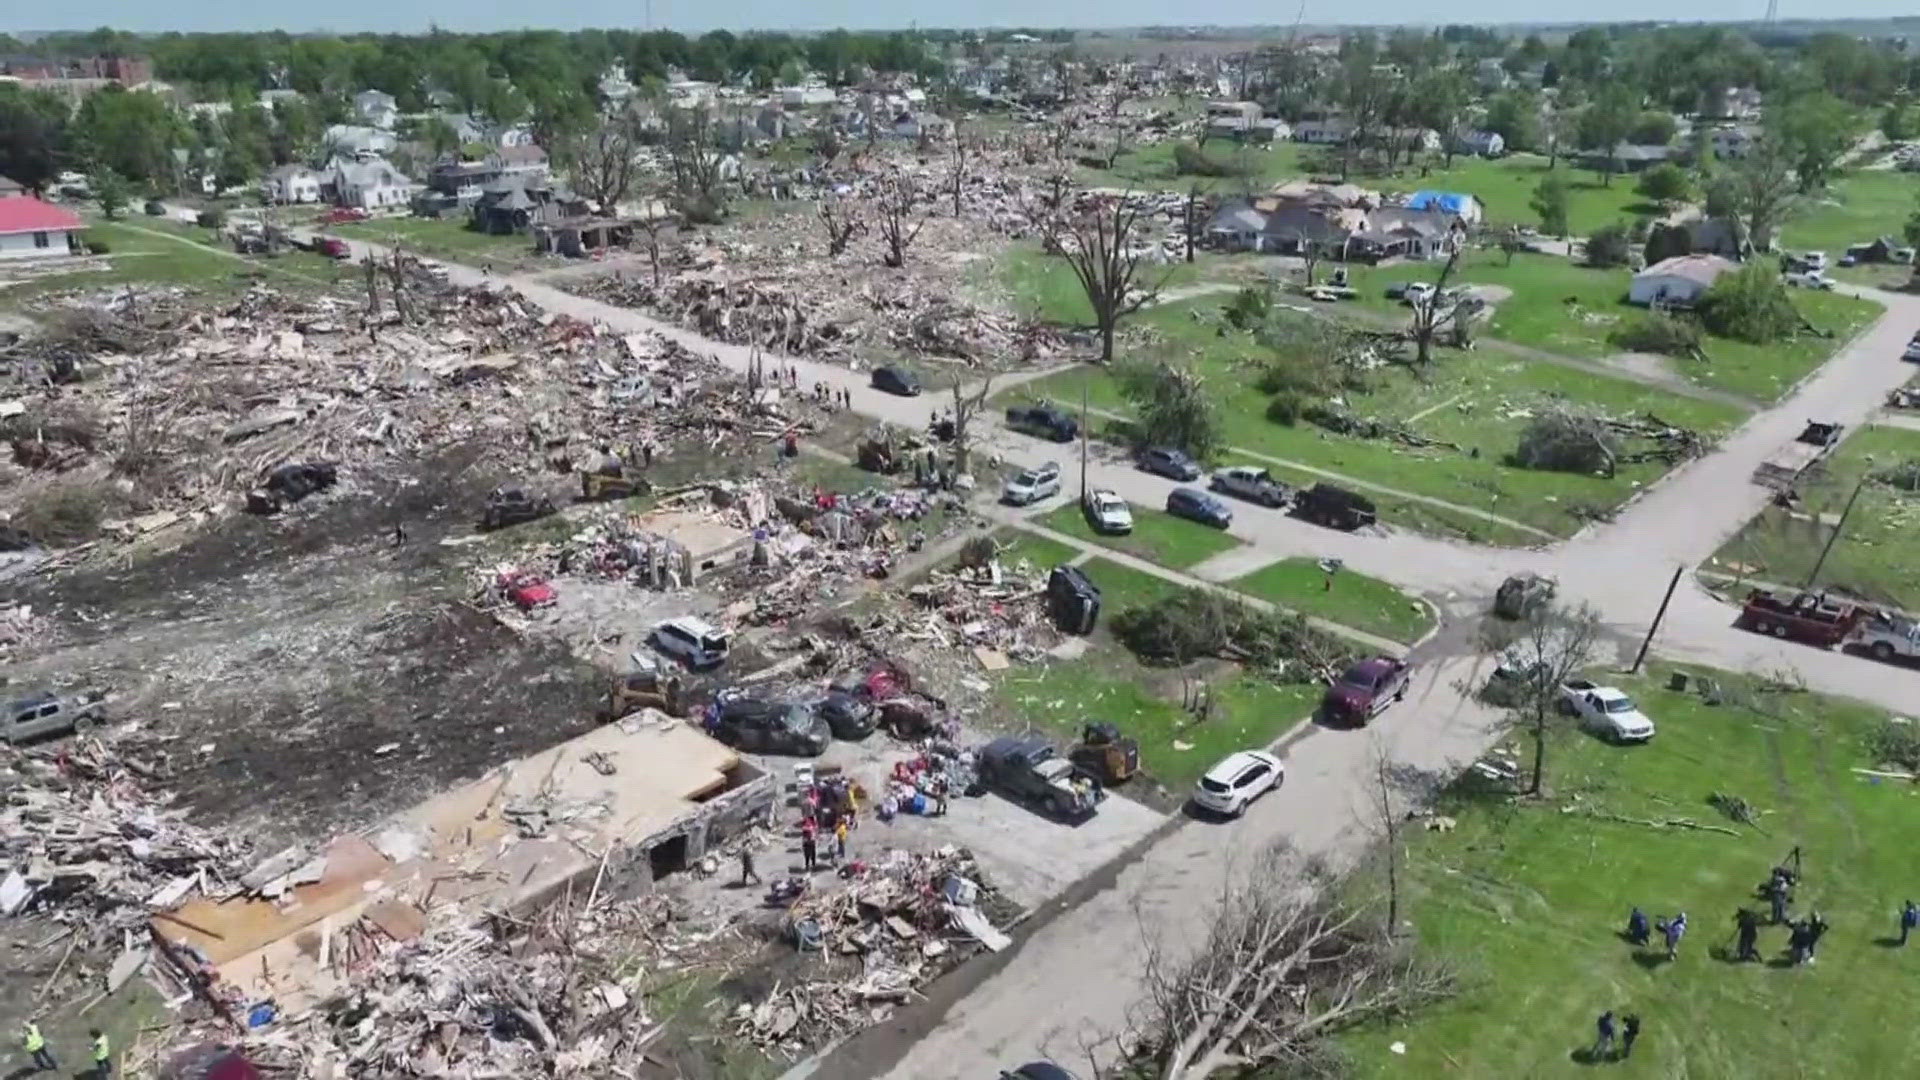 The administrator of FEMA will be in Greenfield, Iowa, surveying damage from a tornado. The tornado also caused severe damage to a nearby 94-year-old family farm.